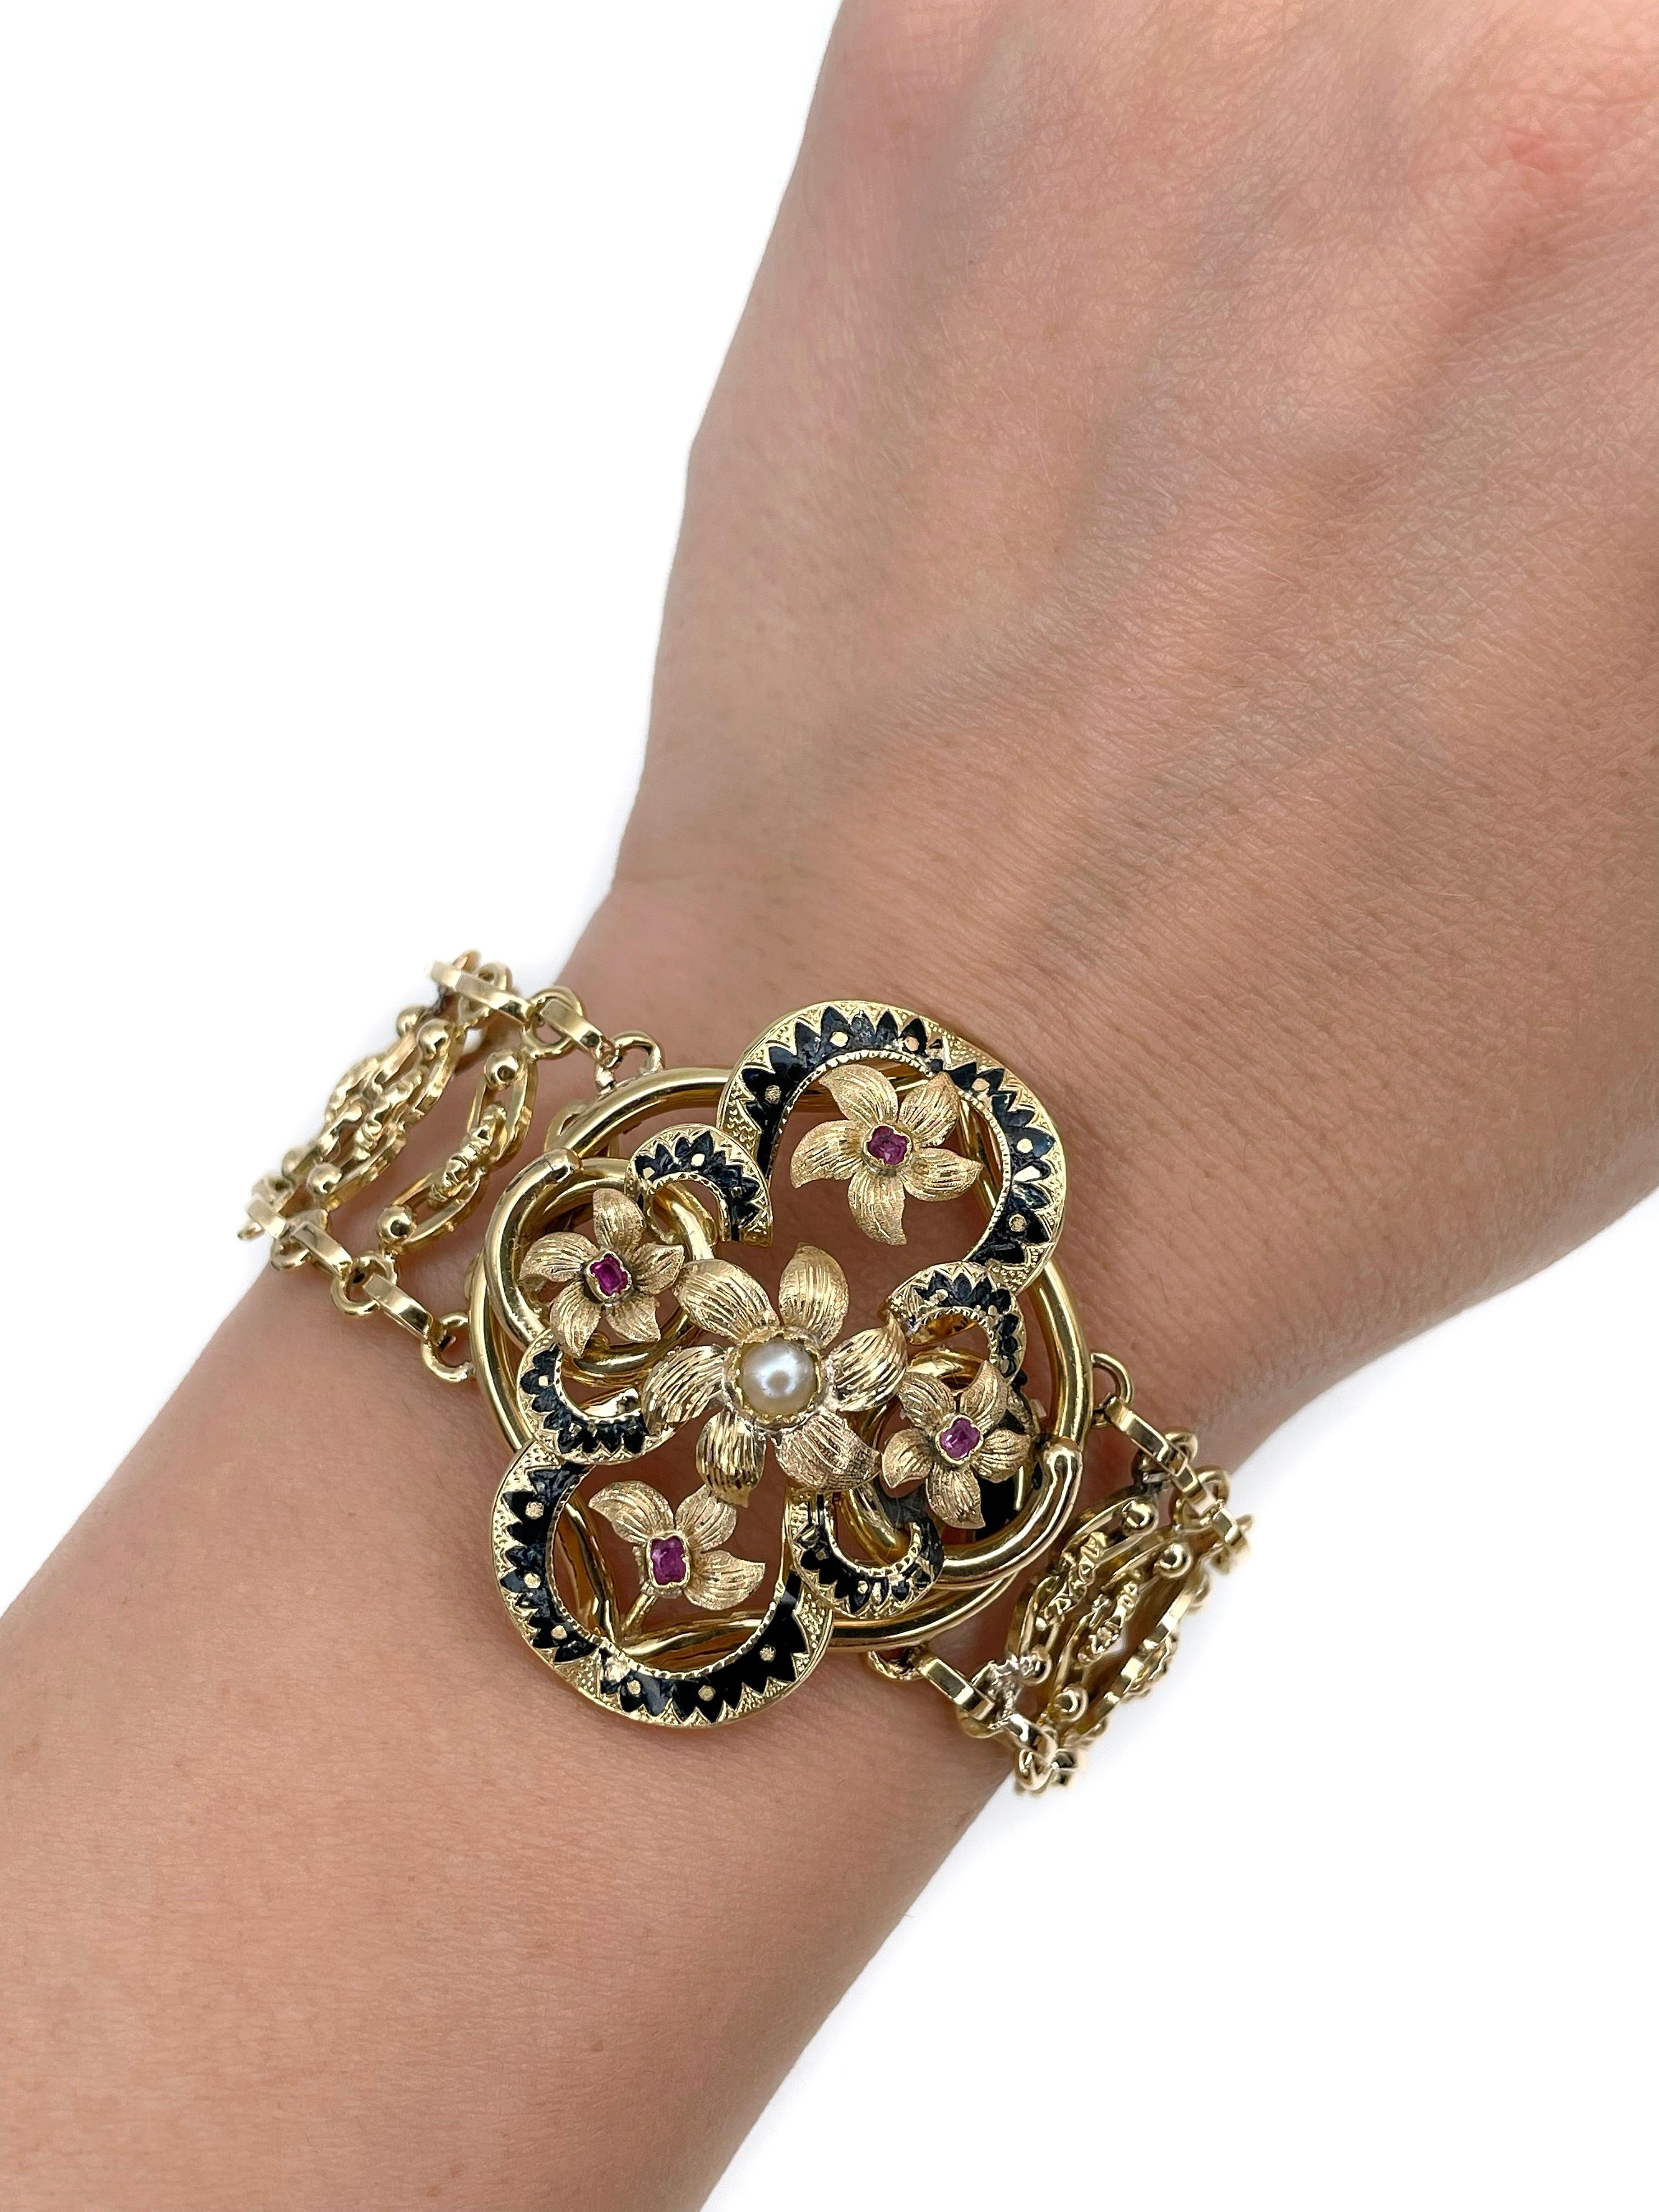 This is an amazing Napoleon 3rd bracelet crafted in 18K yellow gold. Circa 1880. 

The piece is adorned with black enamel. It features rubies and a pearl.

Has a safety chain. 

Weight: 21.27g
Length: 17.5cm
Width: 2cm
Central detail: